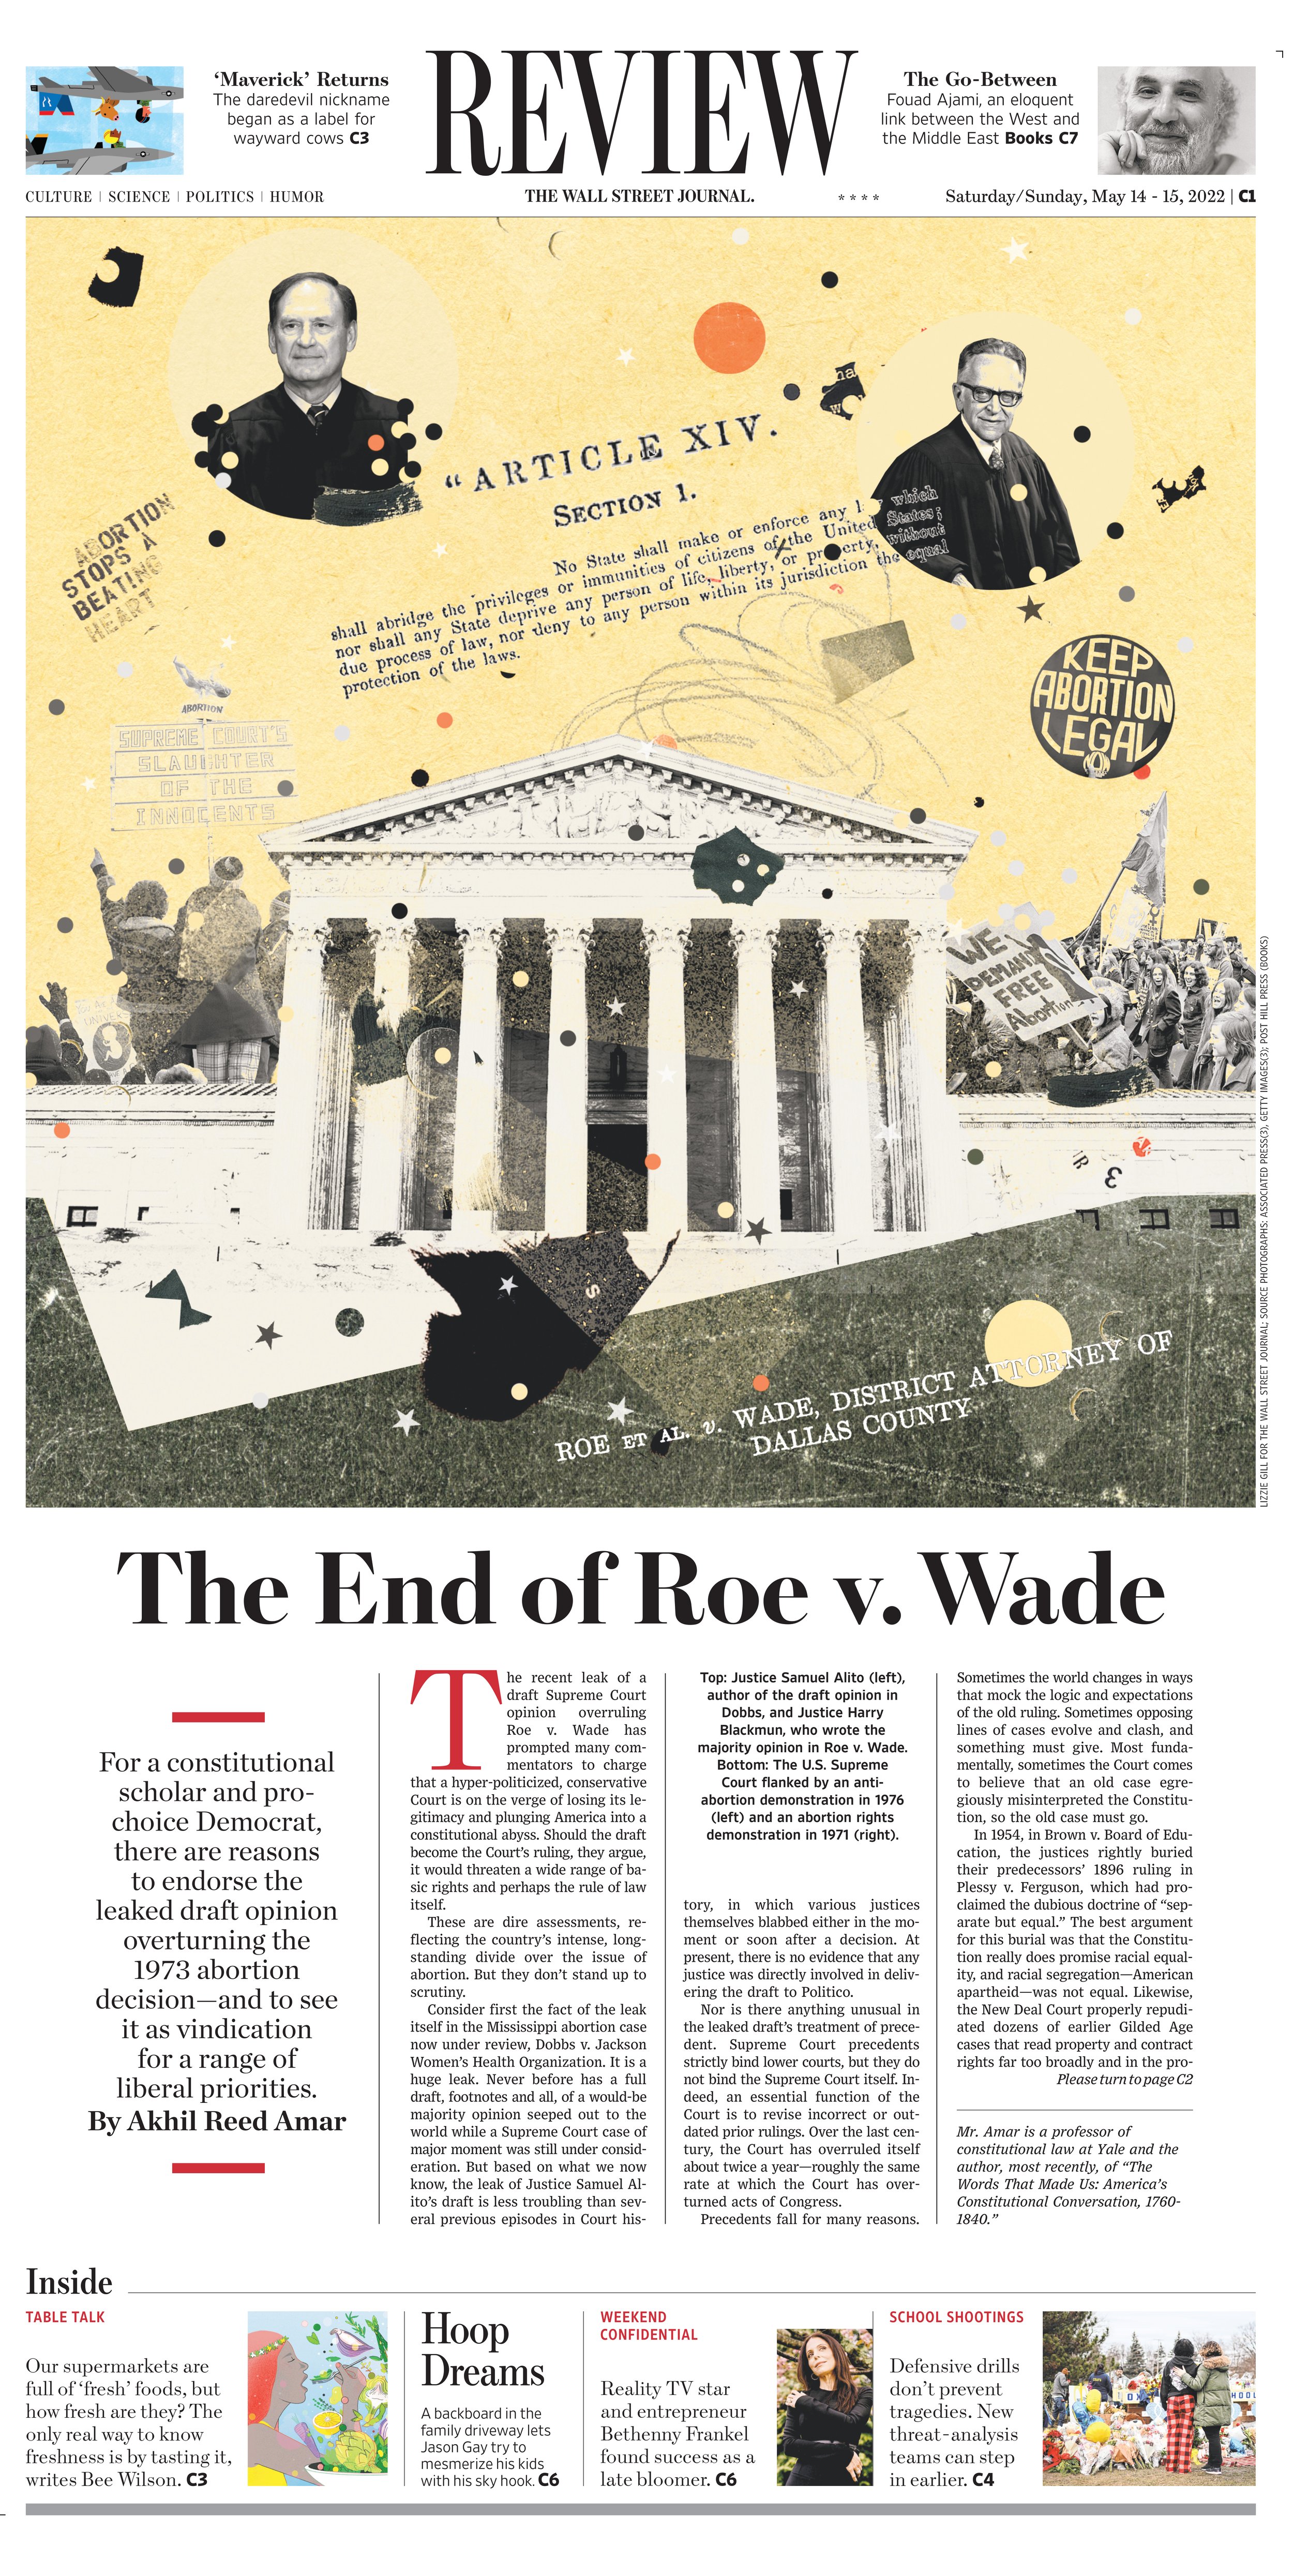 Cover image by Lizzie Gill for The Wall Street Journal, art direction by Pia Peterson Haggarty